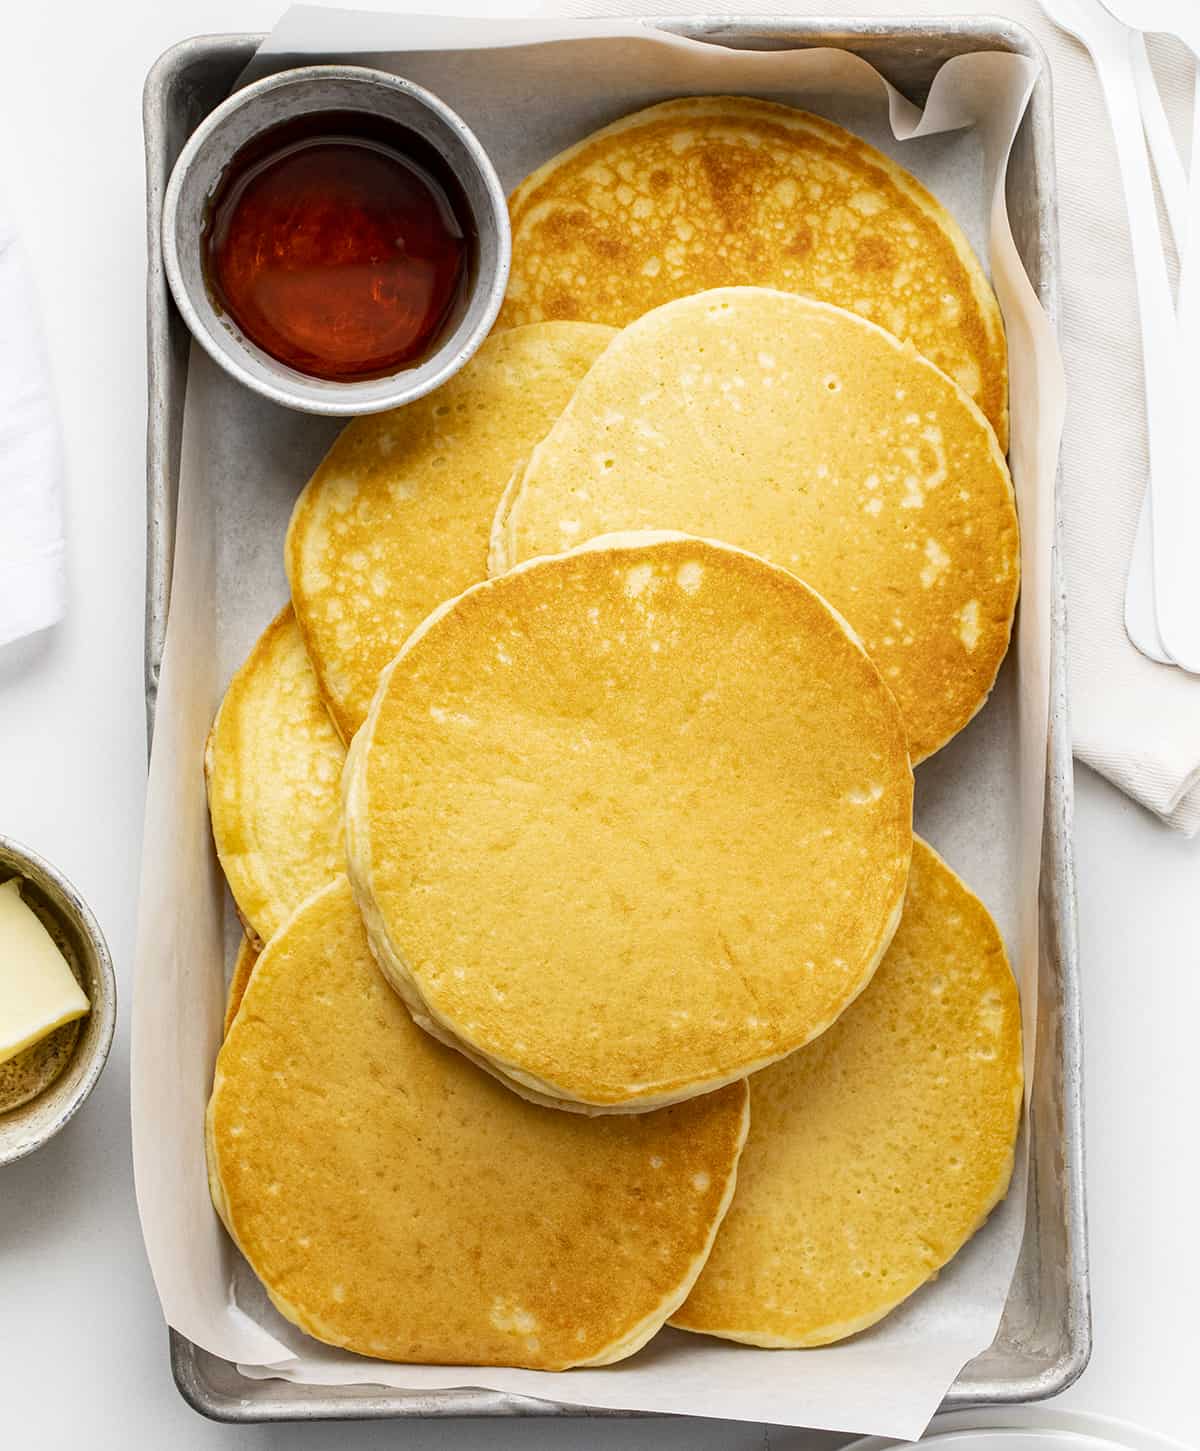 Pan of Buttermilk Pancakes with Syrup. Breakfast, Pancakes, Buttermilk Pancakes, Easy Pancakes, The Best Pancakes, Classic Pancakes, Breakfast Recipes, Kid Breakfast Recipes, i am baker, iambaker.